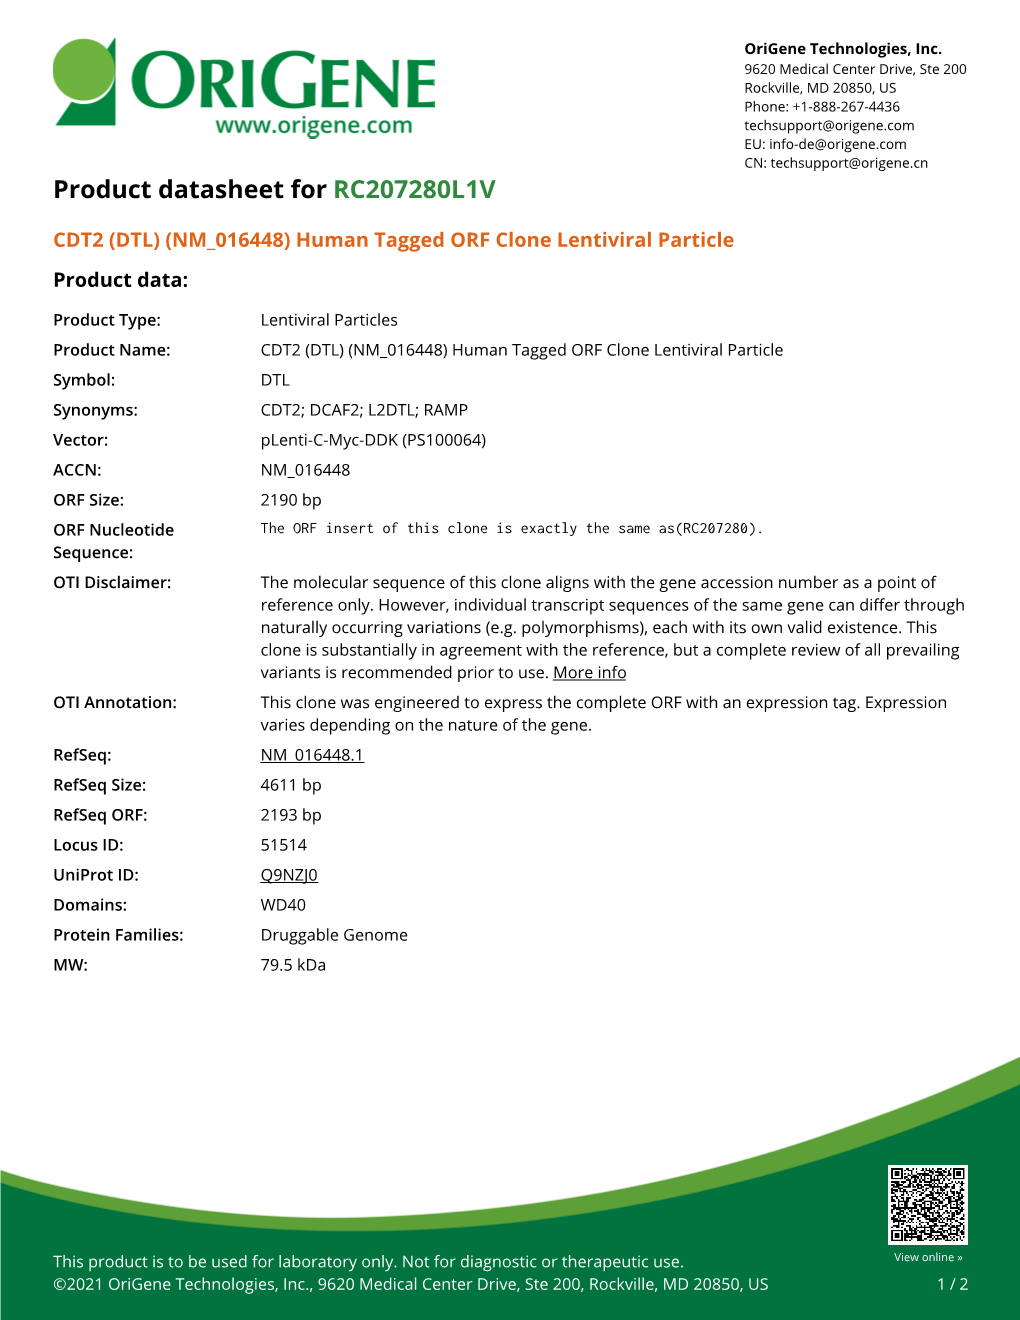 CDT2 (DTL) (NM 016448) Human Tagged ORF Clone Lentiviral Particle Product Data